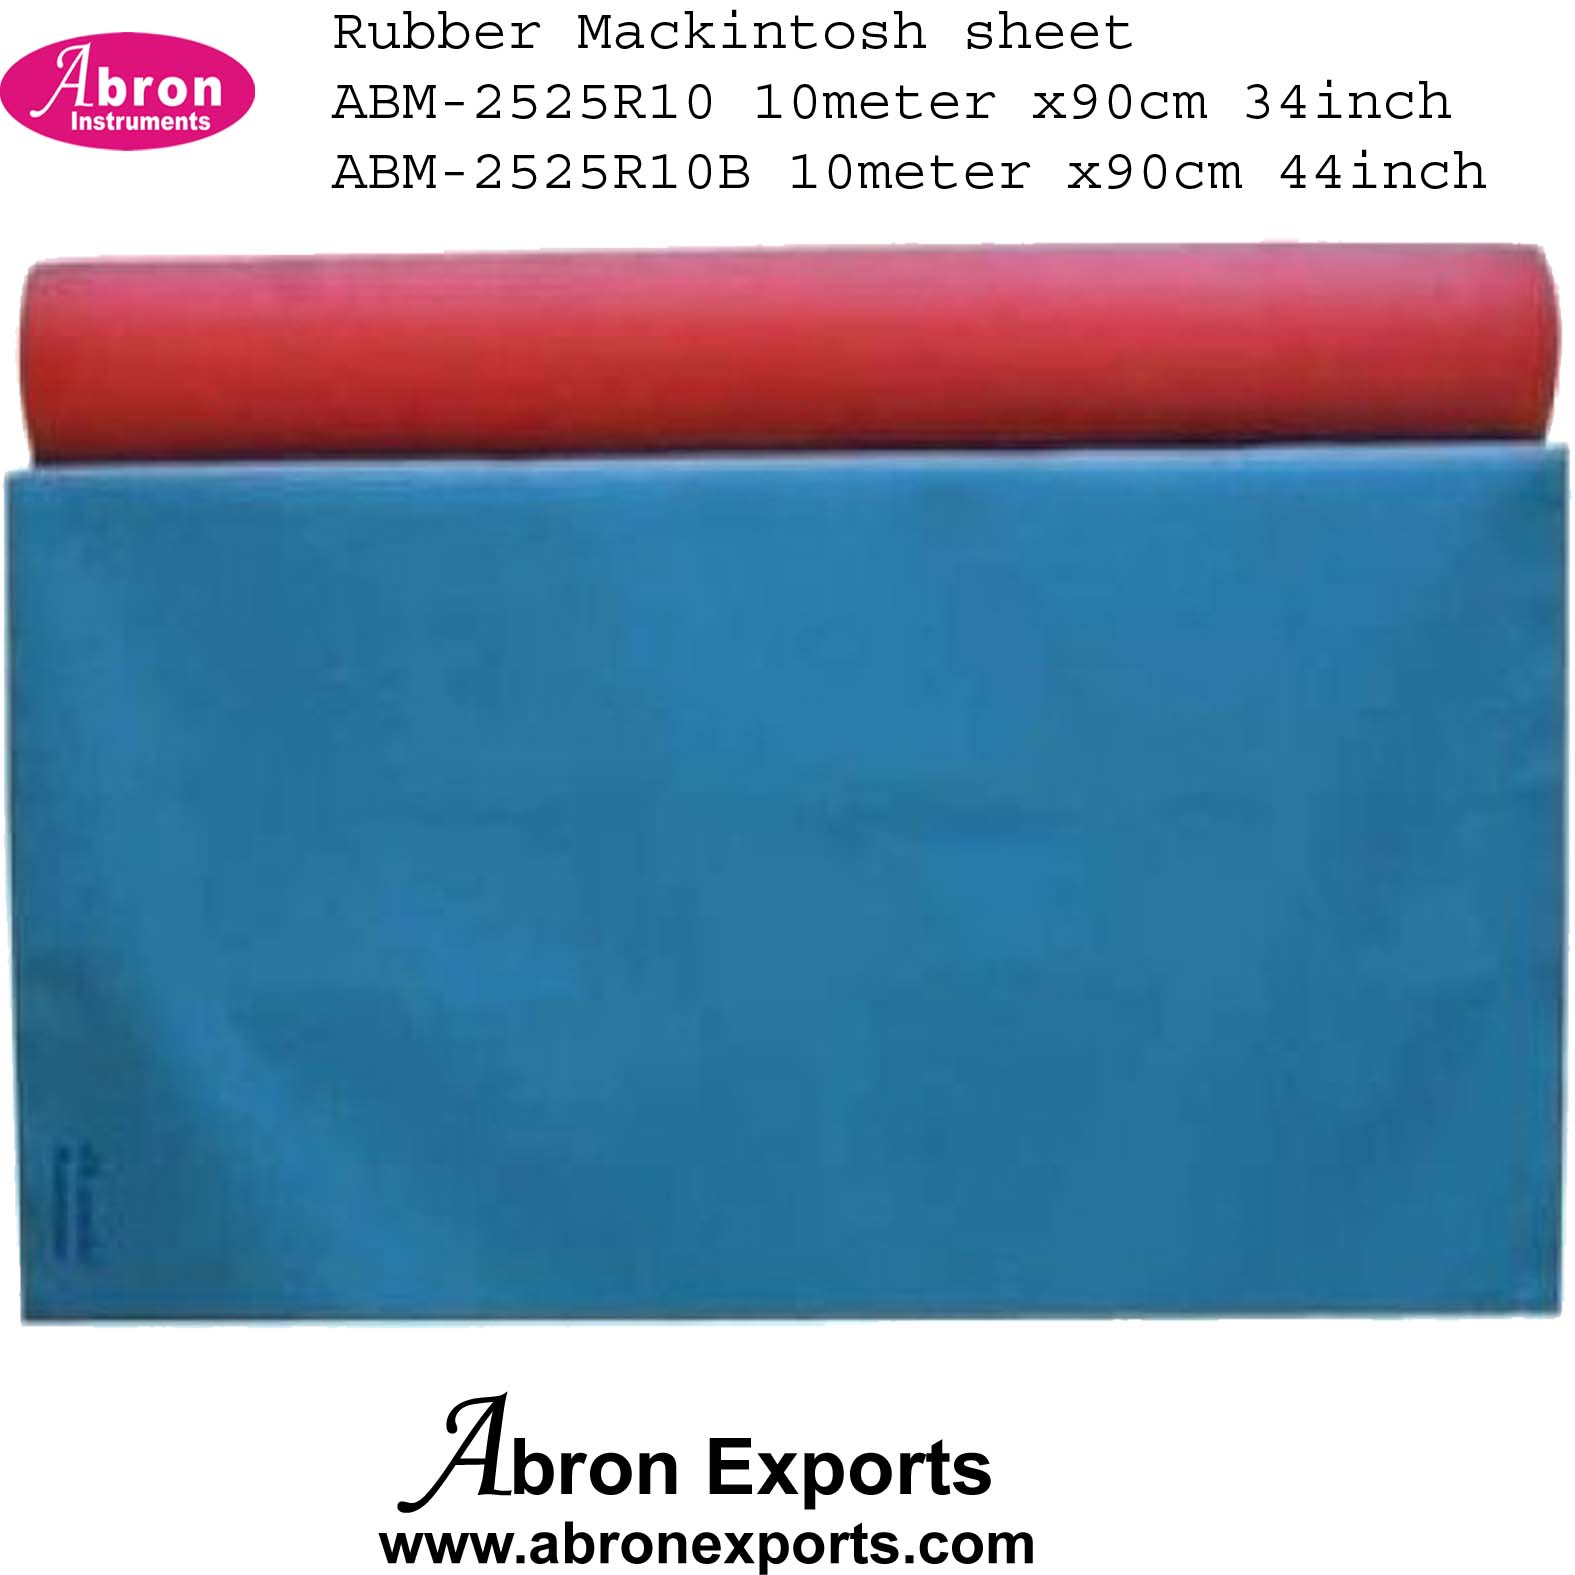 Rubber Mackintosh sheet 10 meter width 44 inch rubber sheet for hospital bed surgical Abron ABM-2525R10B 